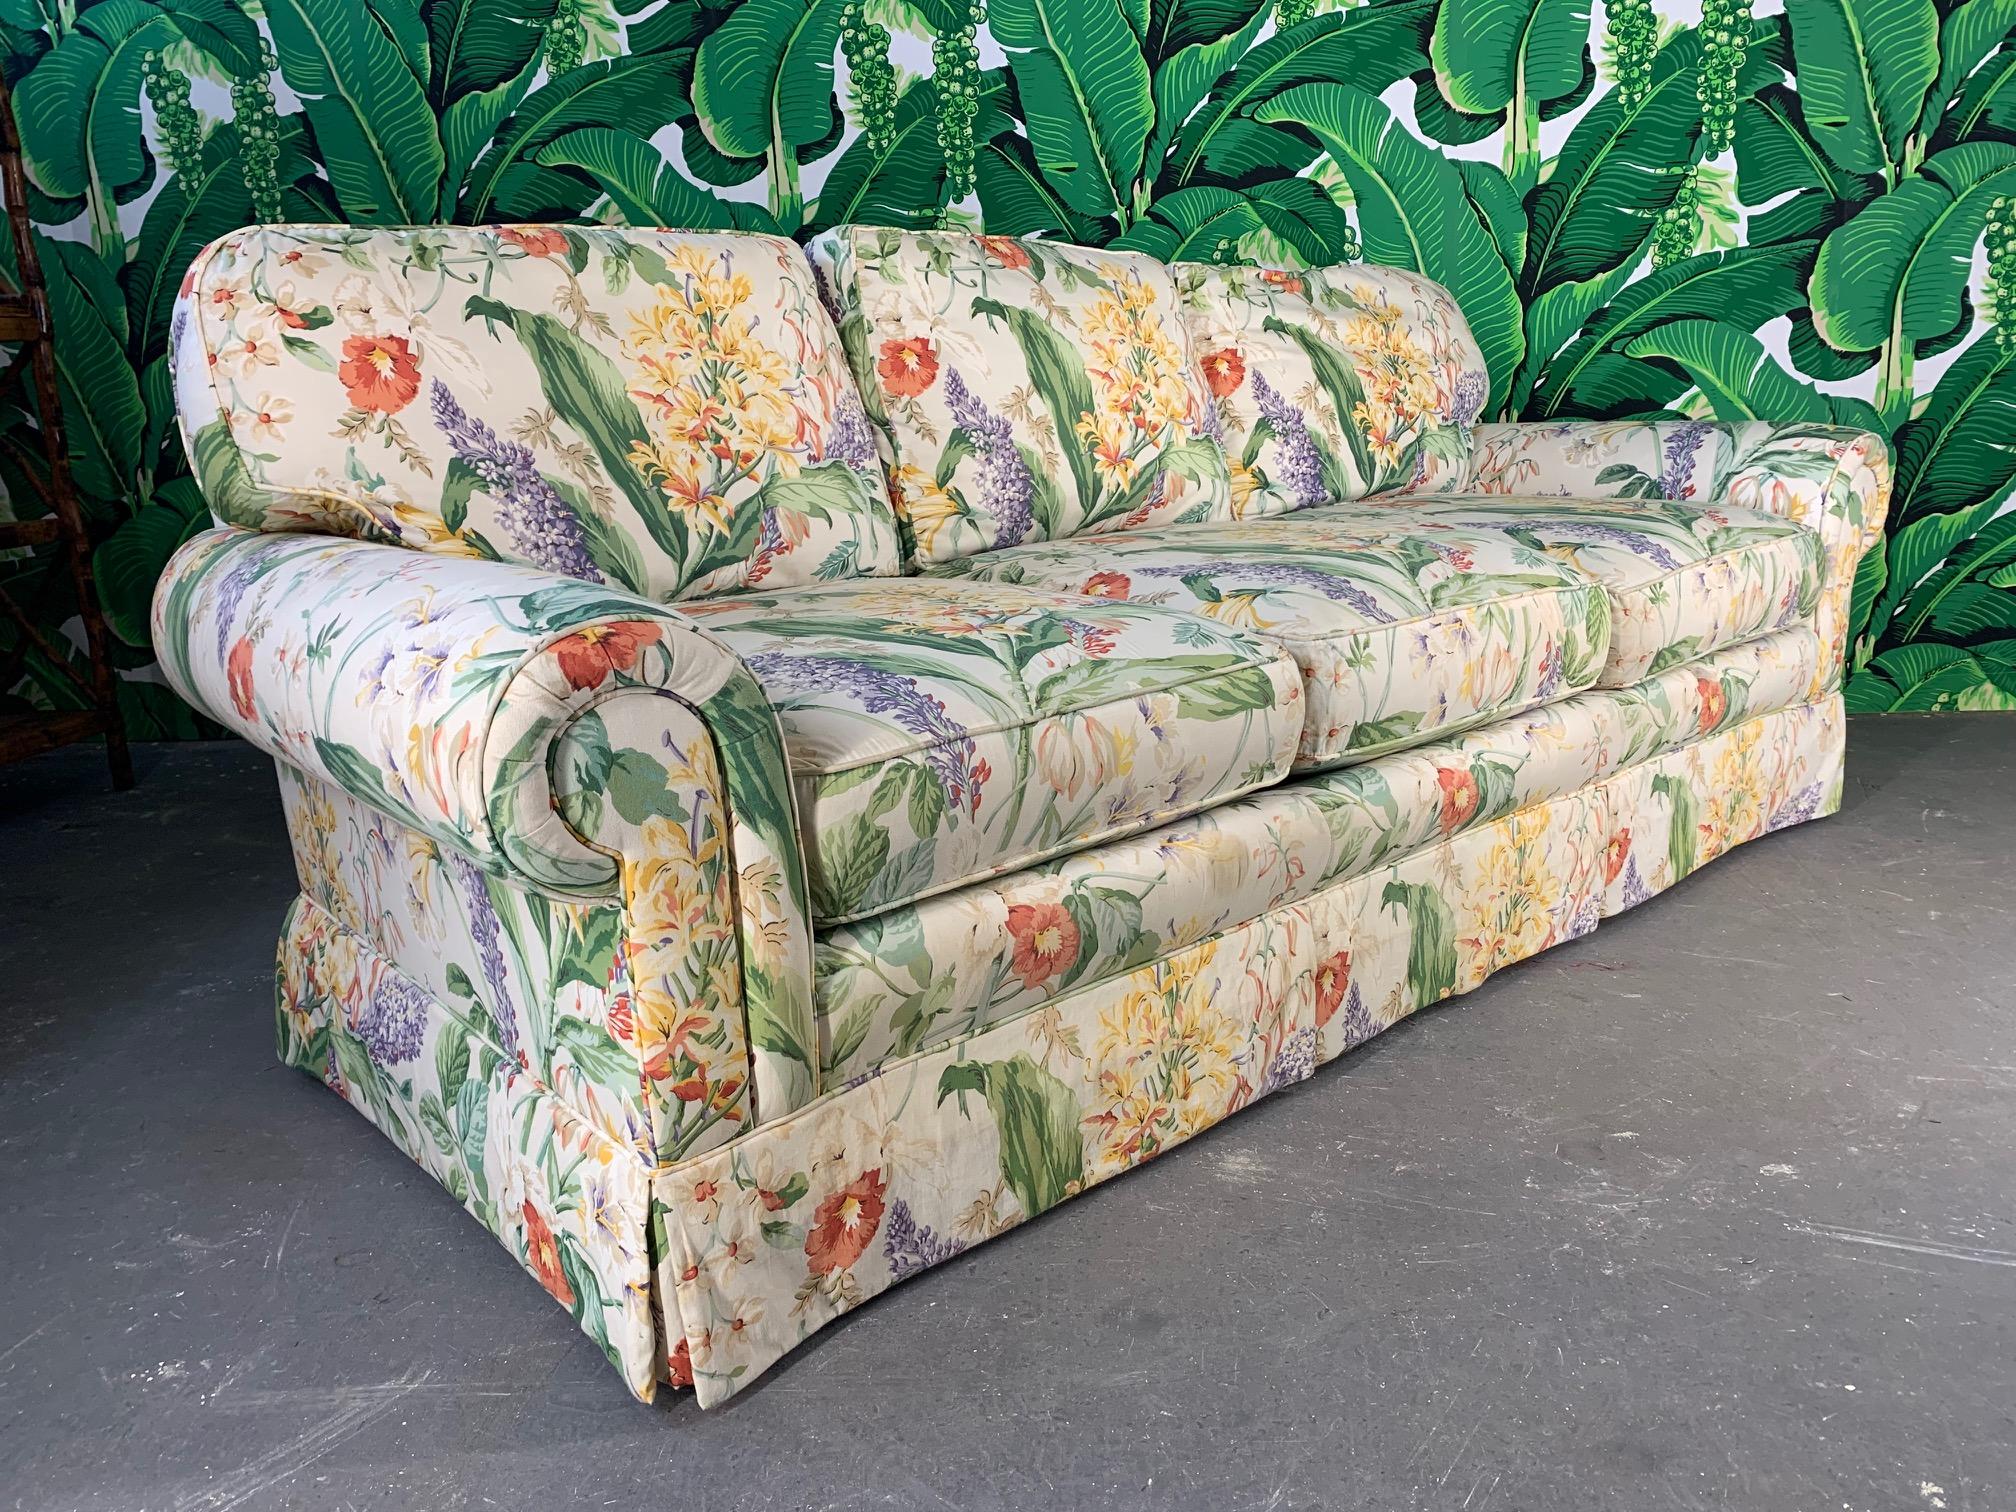 Fabulous floral upholstered sofa by Robb & Stucky. Very comfortable and a striking print that makes a statement. Very good vintage condition with no odors, rips, or obvious stains. There are some very slight discolorations in a few small areas but